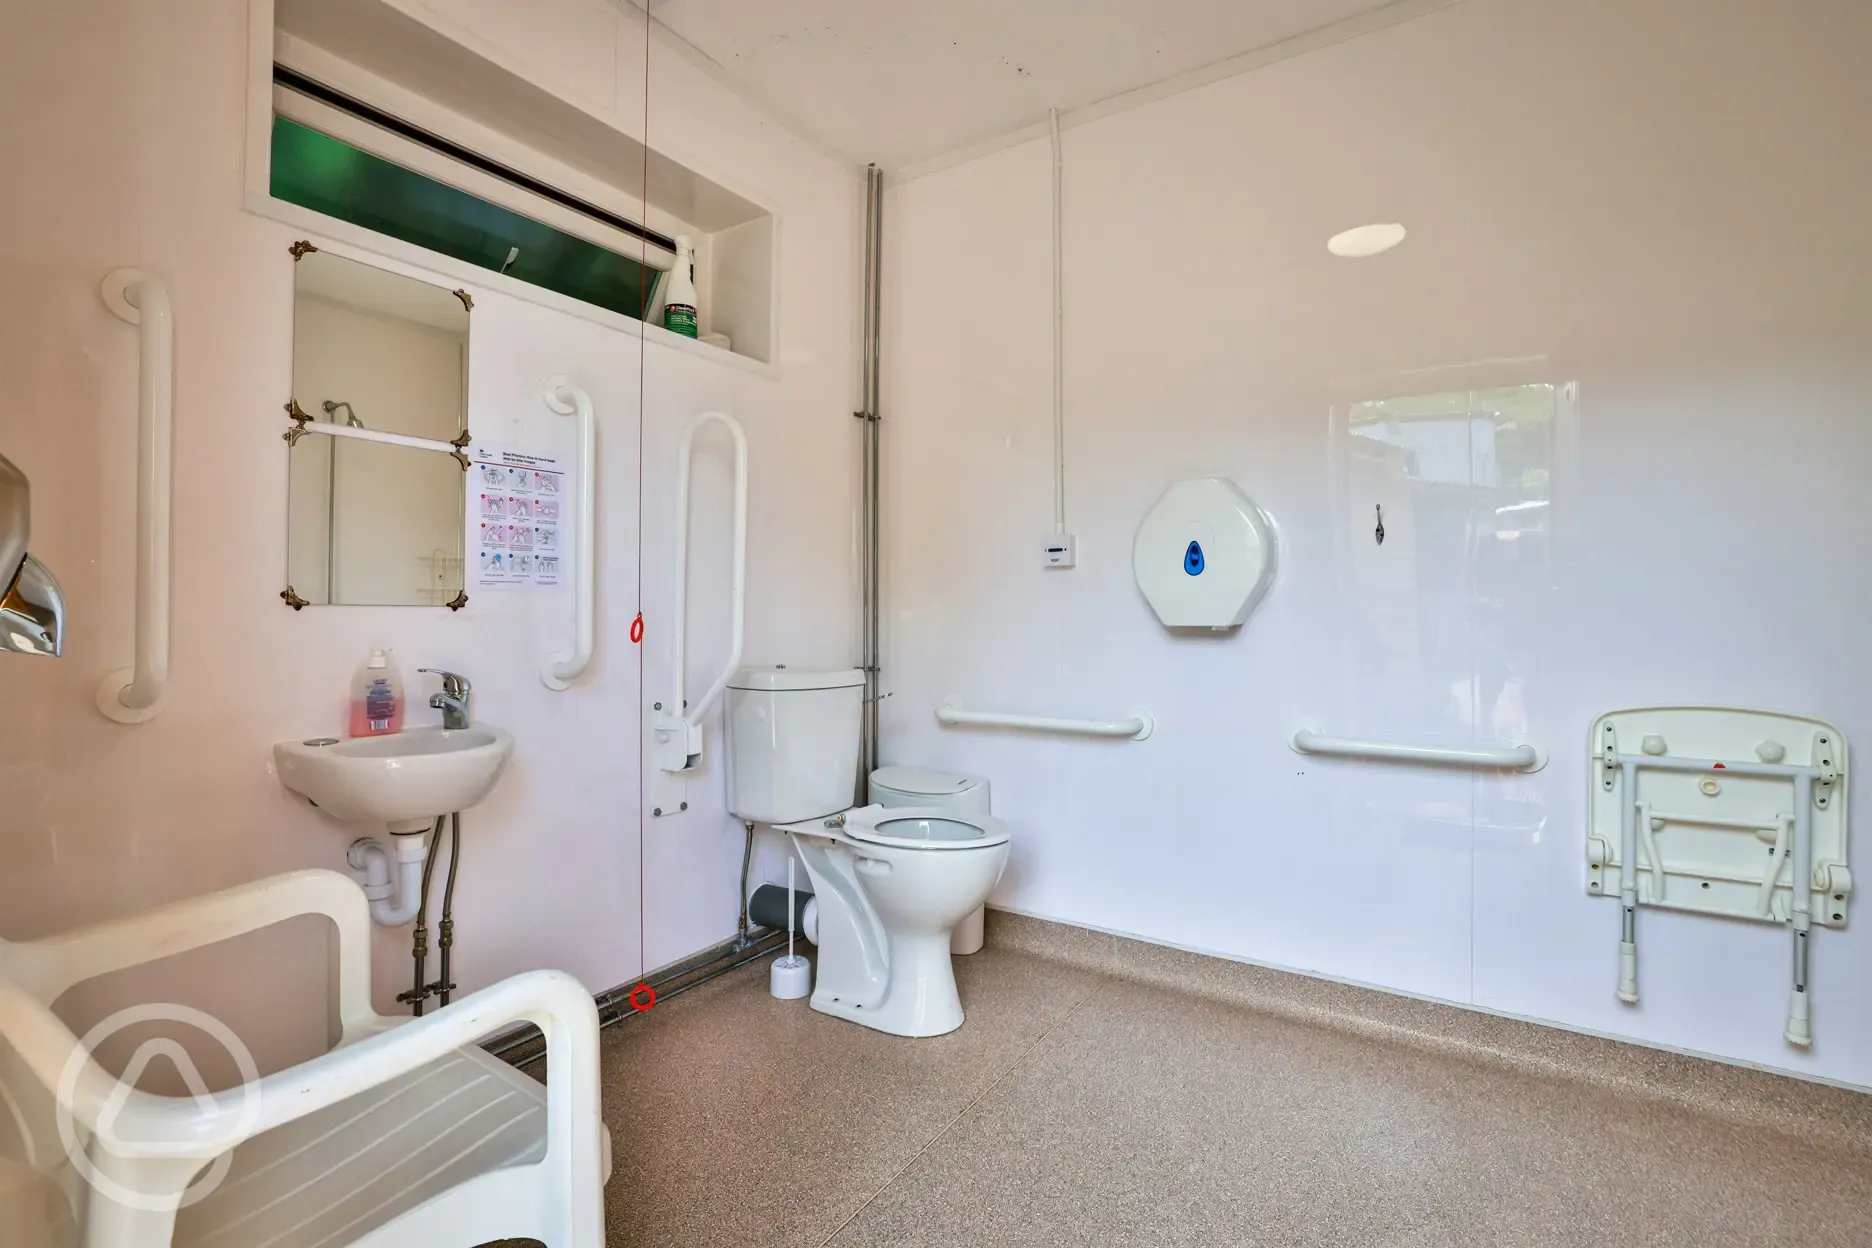 Disabled and family shower room